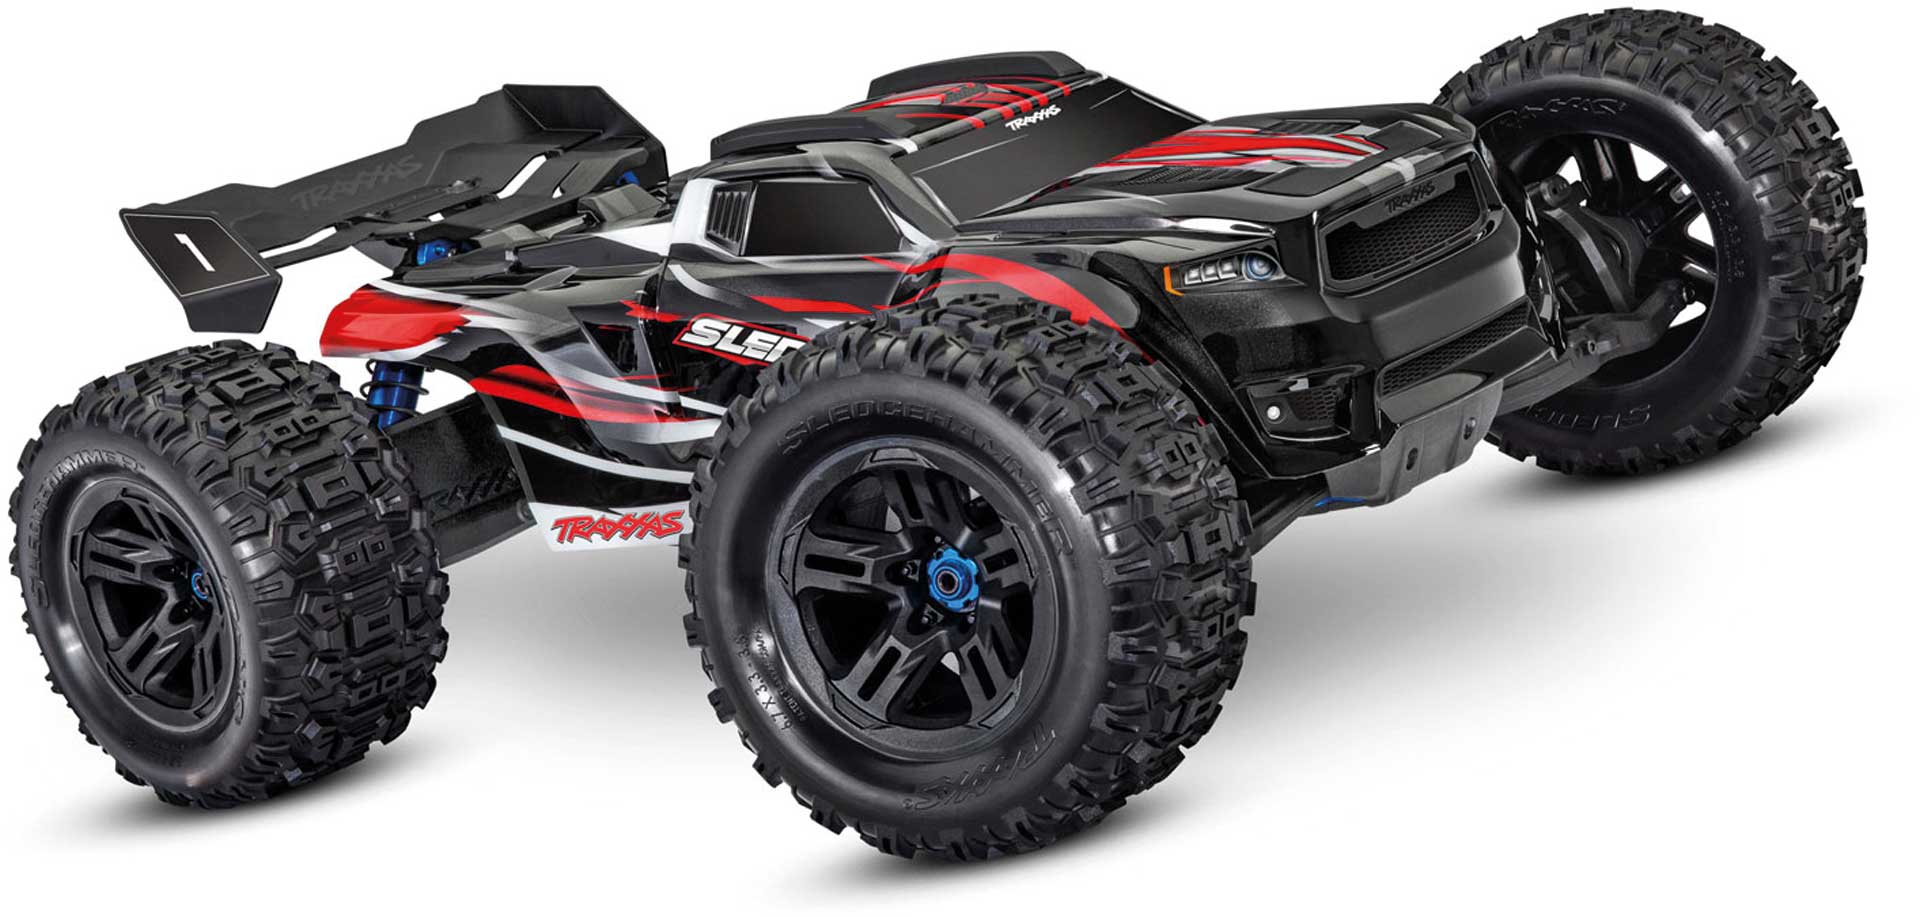 TRAXXAS SLEDGE 1/8 4WD BRUSHLESS TRUGGY ROUGE RTR SANS CHARGEUR/SANS ACCU